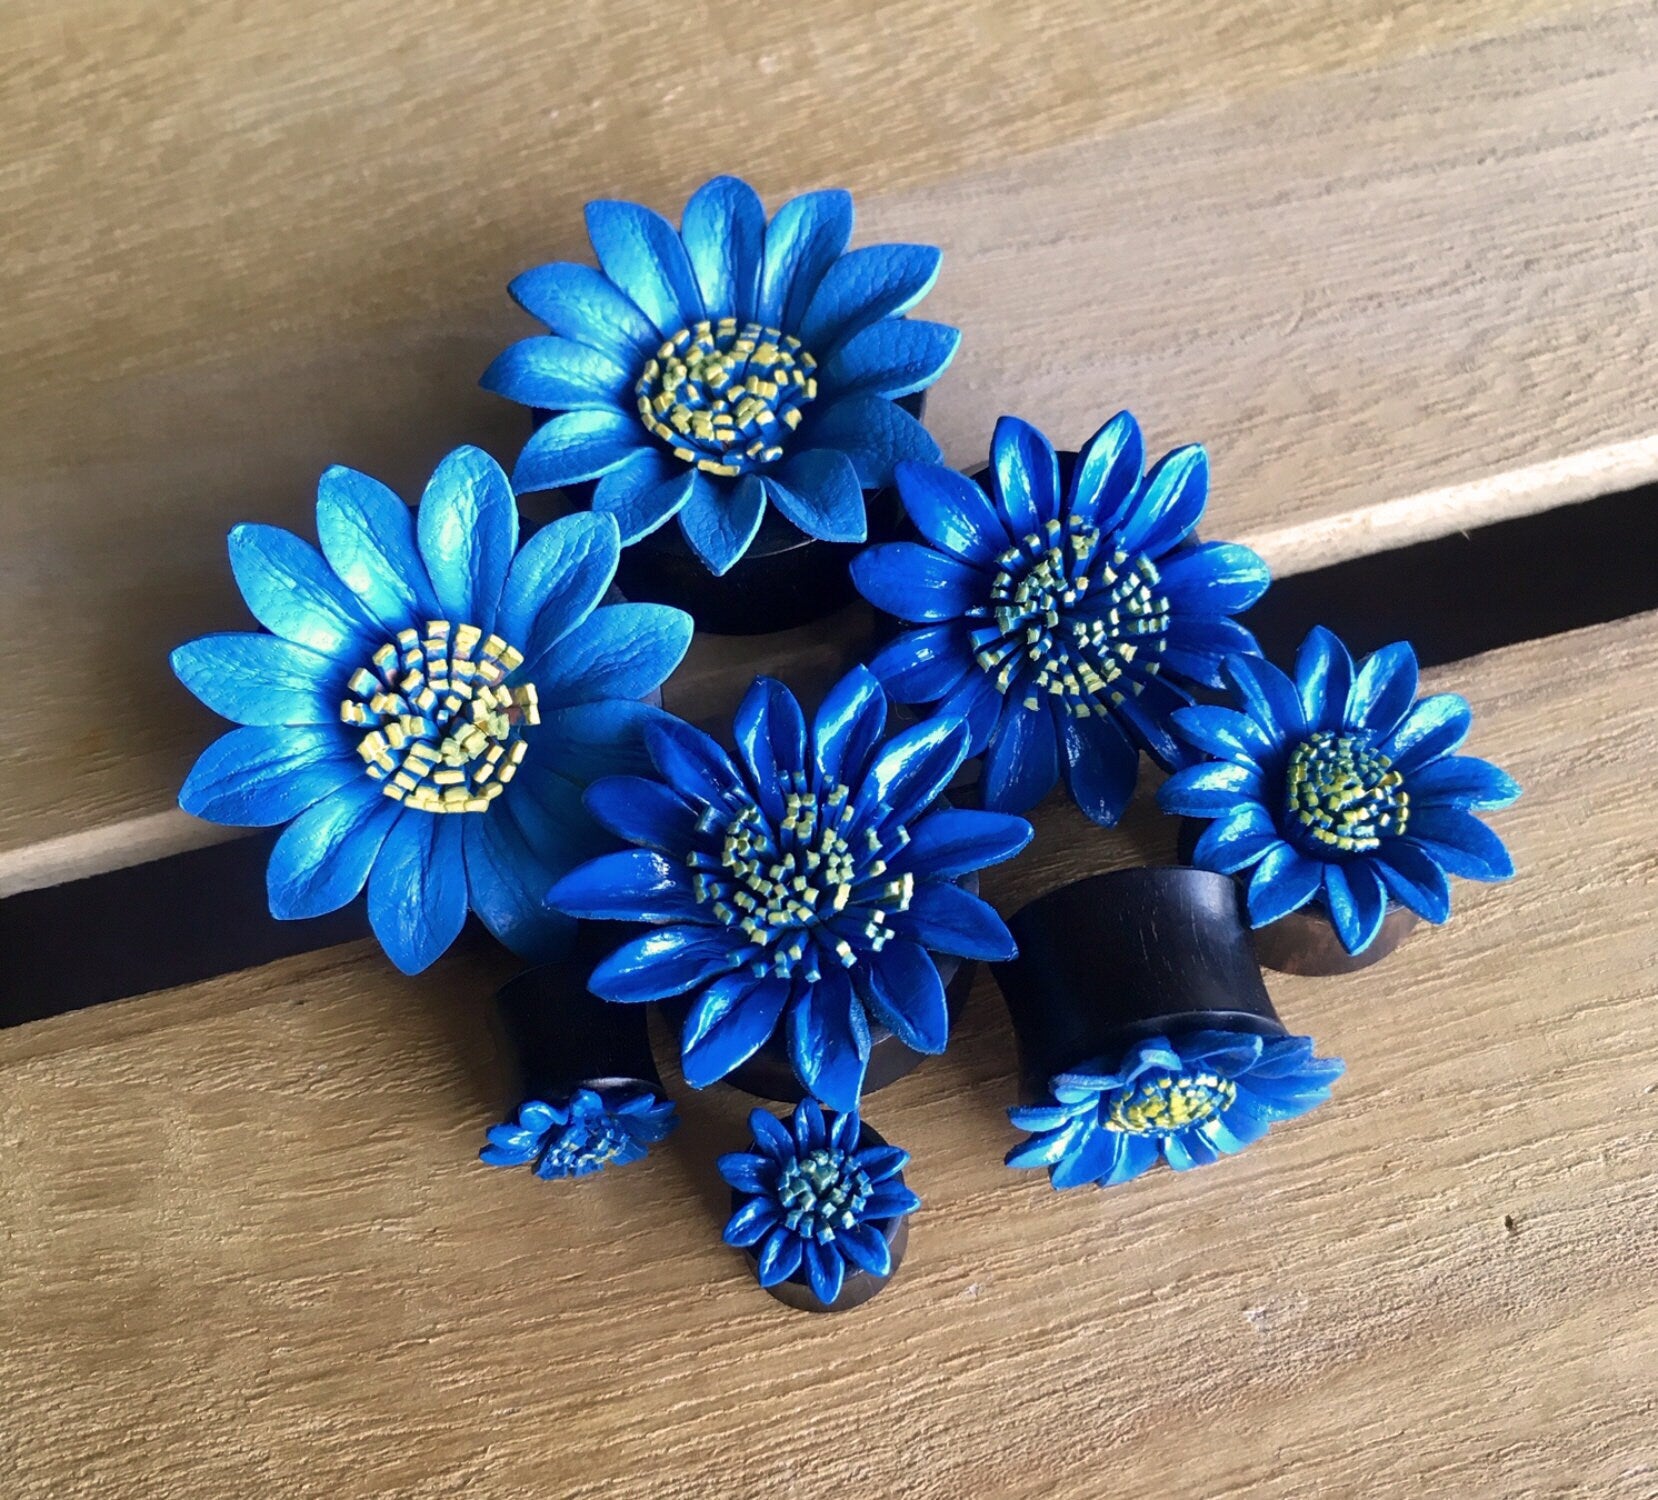 PAIR of Stunning Blue Leather Flower and Organic Horn Plugs - Gauges 0g (8mm) up to 1&1/4" (32mm) available!